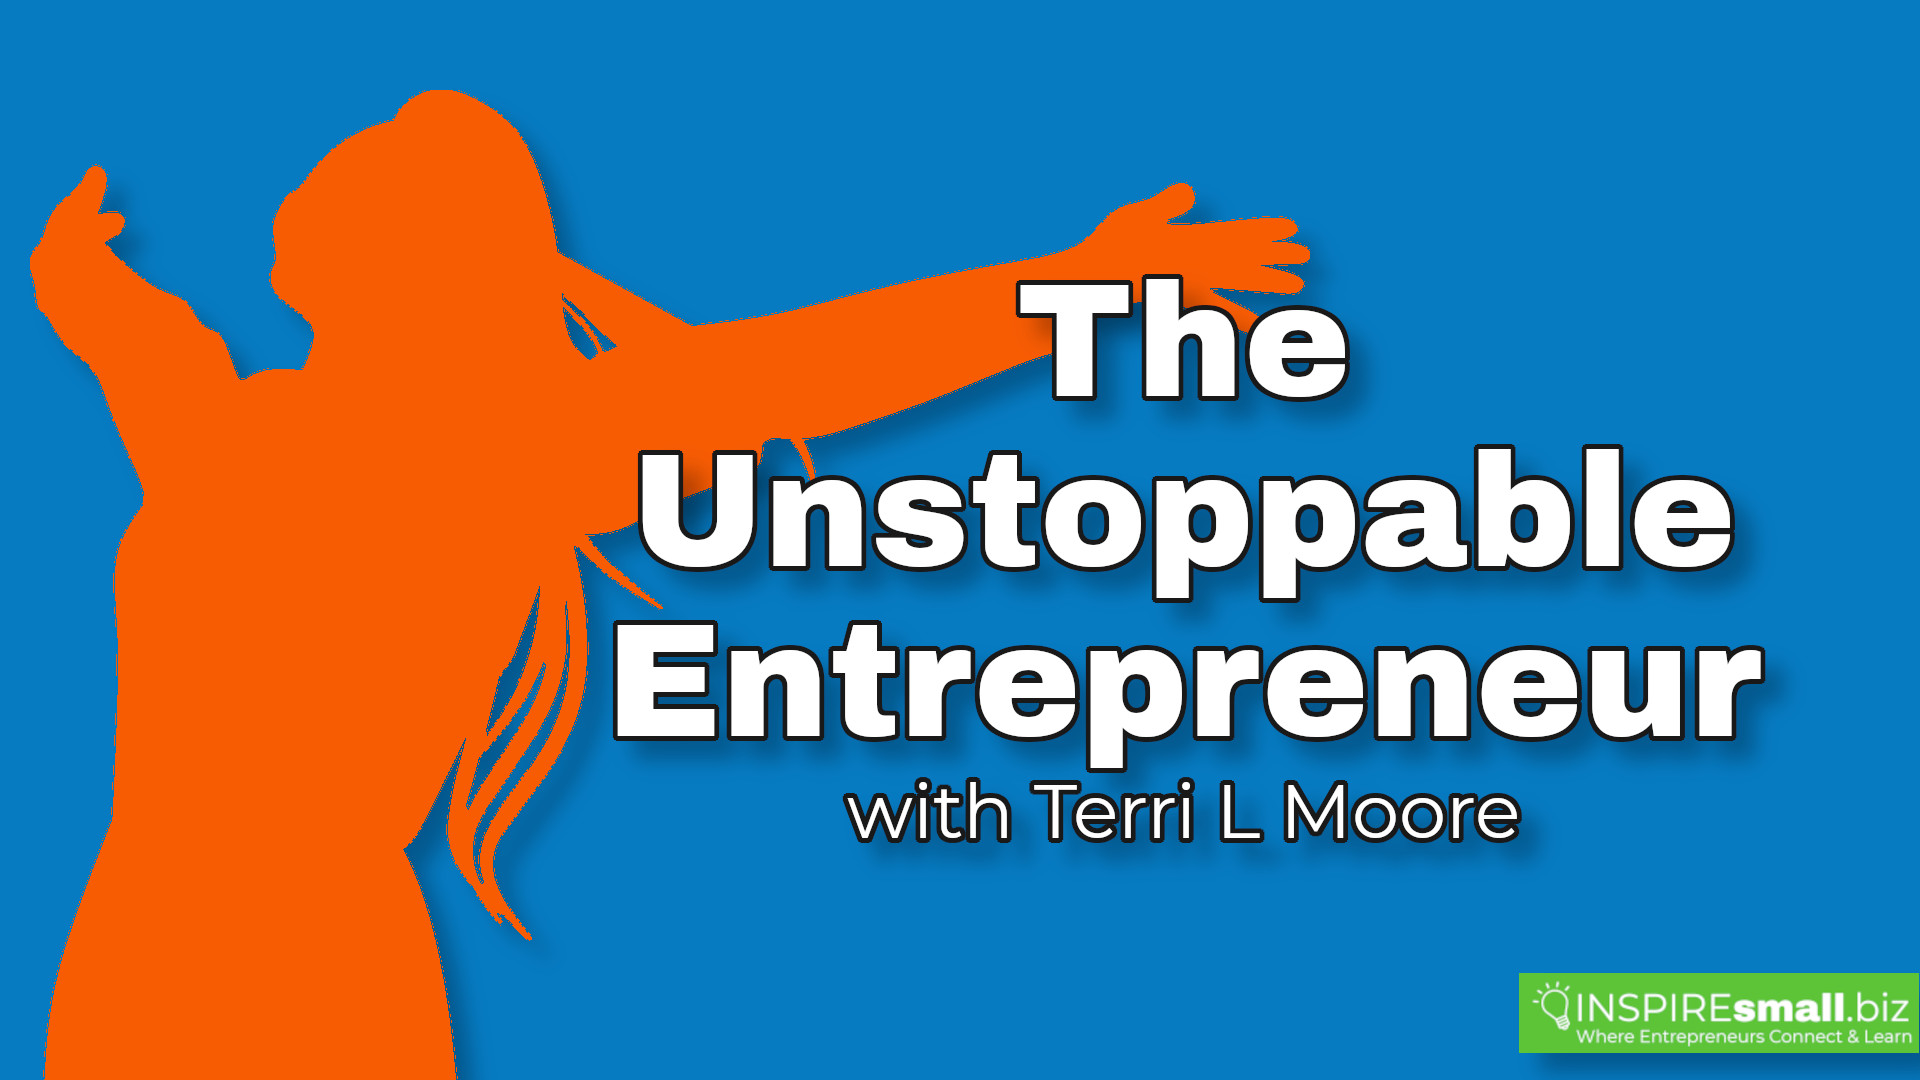 The Unstoppable Entrepreneur with speaker Terri L. Moore - hosted by INSPIREsmall.biz - This is a recorded presentation